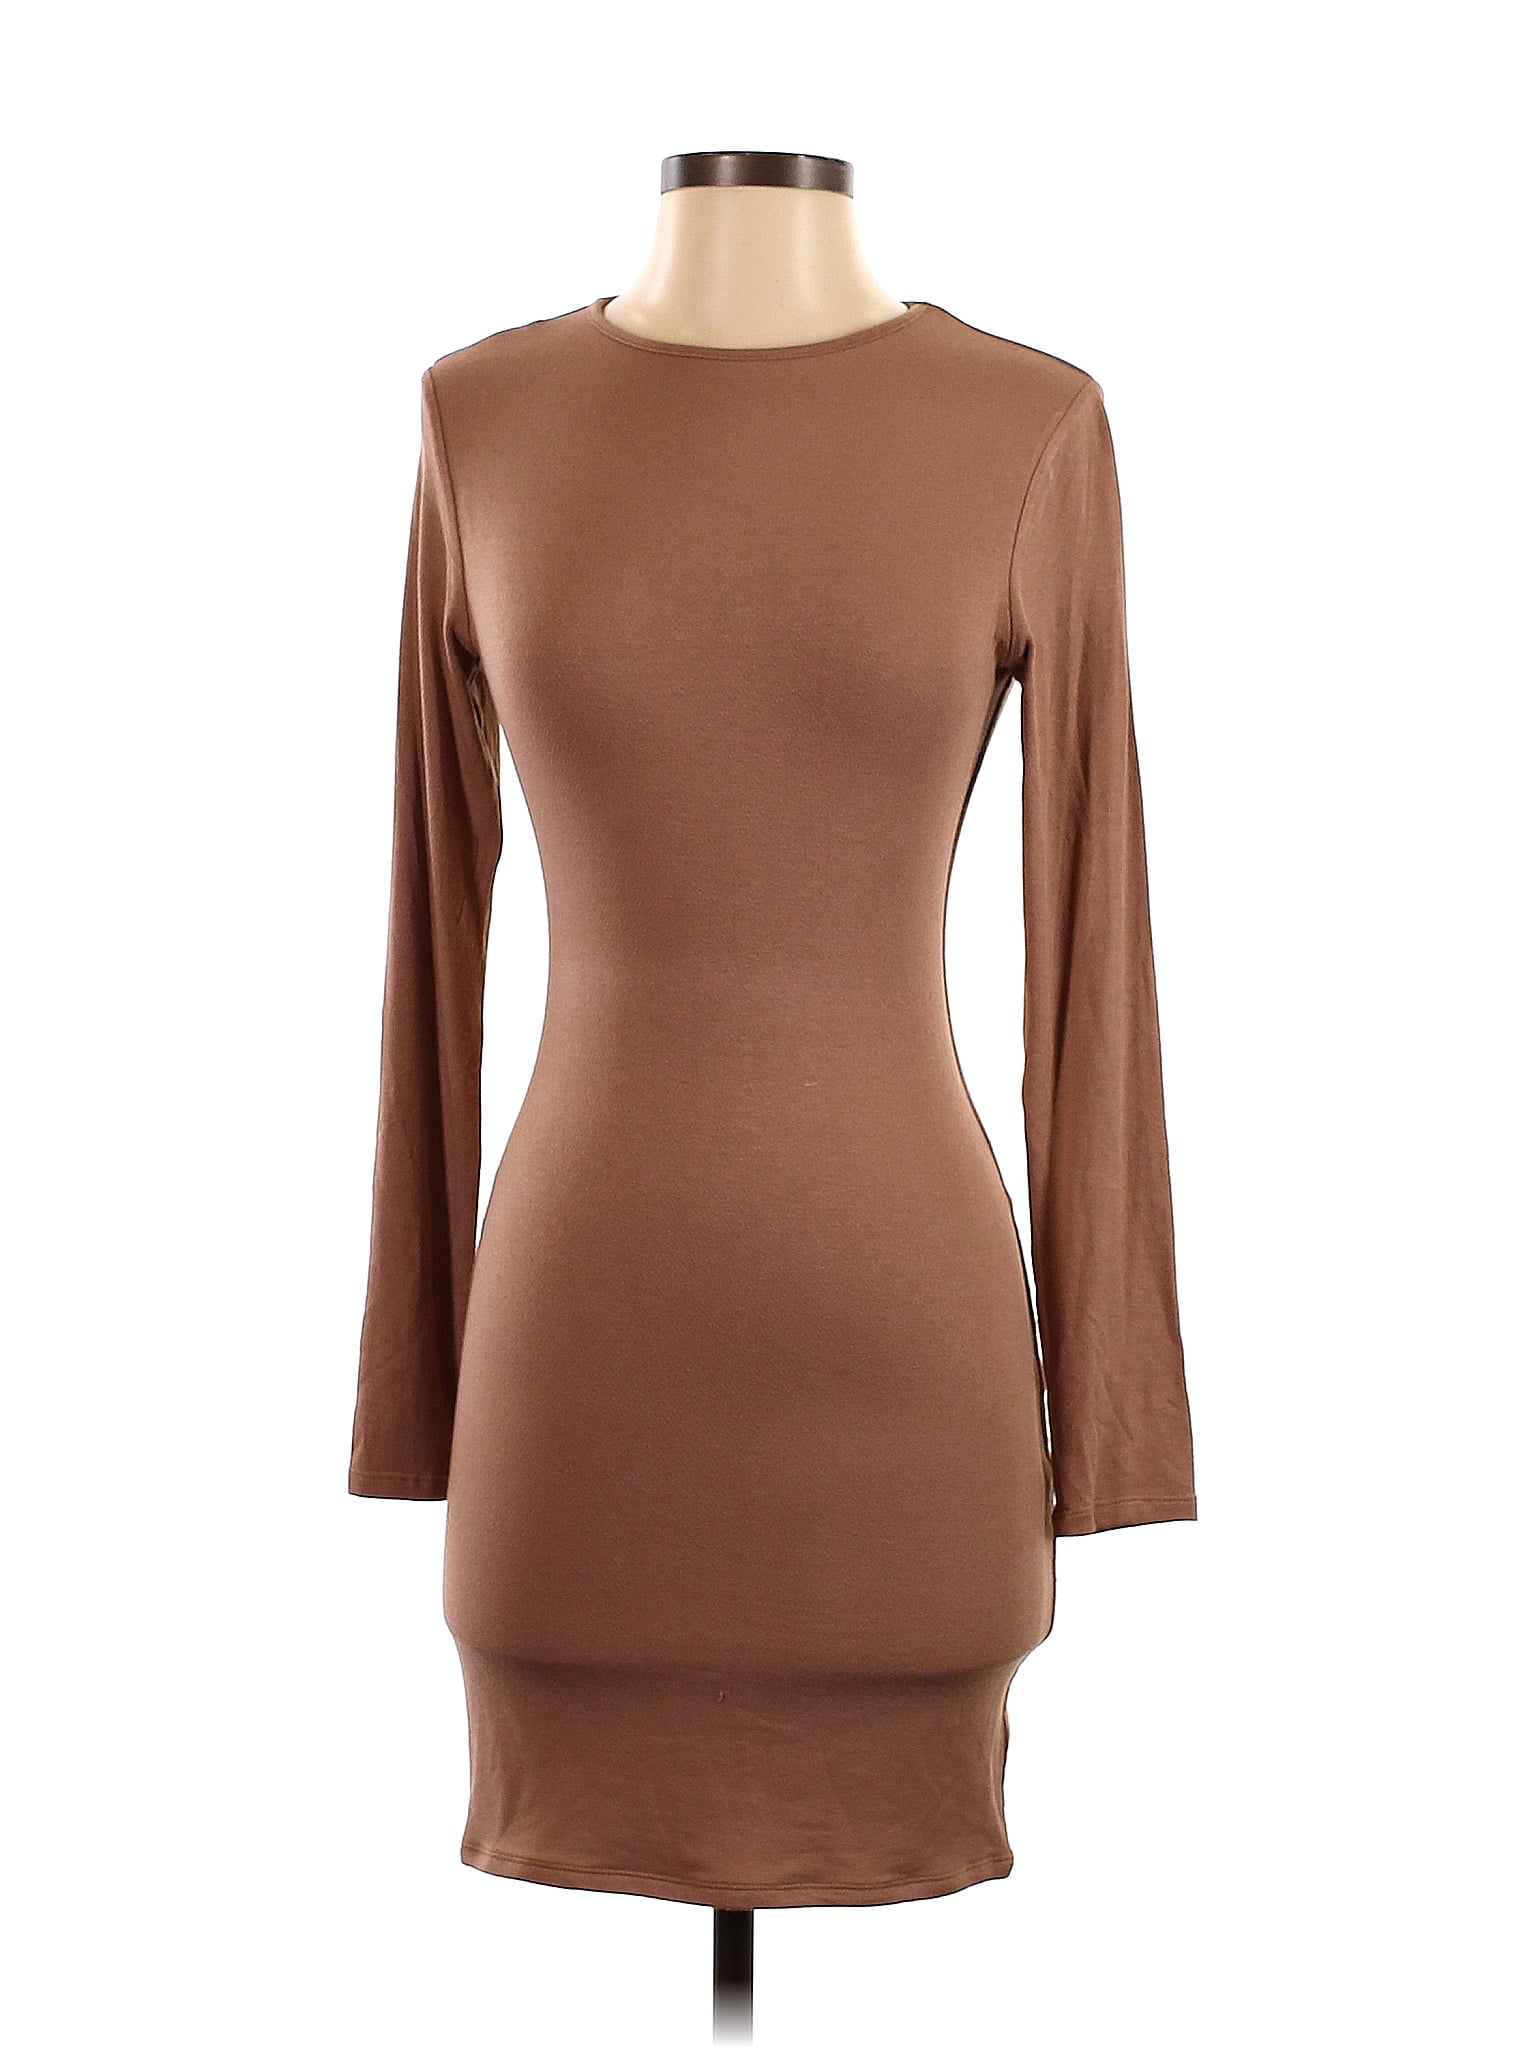 Naked Wardrobe Solid Blush Brown Casual Dress Size 3X (Plus) - 54% off